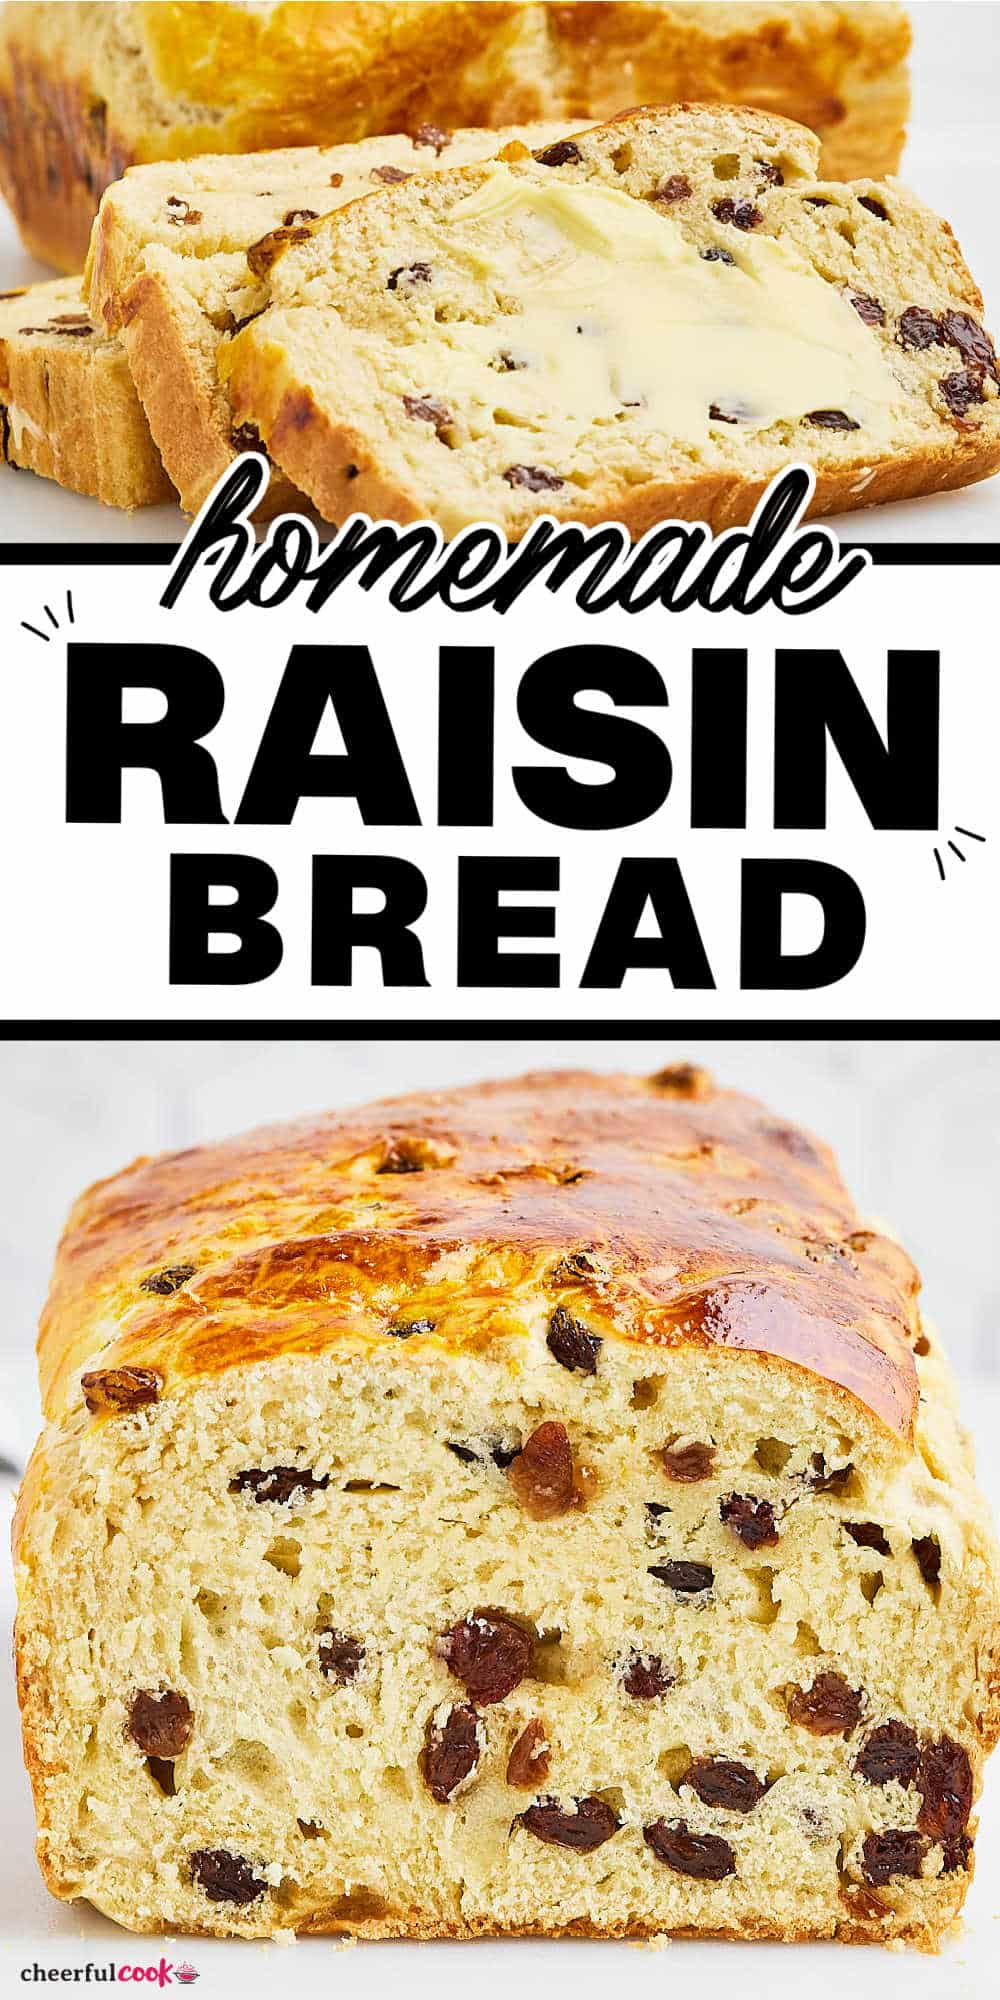 Indulge in the inviting aroma of homemade Raisin Bread - warm, fluffy, and tender. This scrumptious treat is surprisingly easy to make using a few simple ingredients! Start the day with a slice or enjoy a slice as a delicious midday treat. #cheerfulcook #raisinbread #homemadebread #easybaking #yeast  via @cheerfulcook